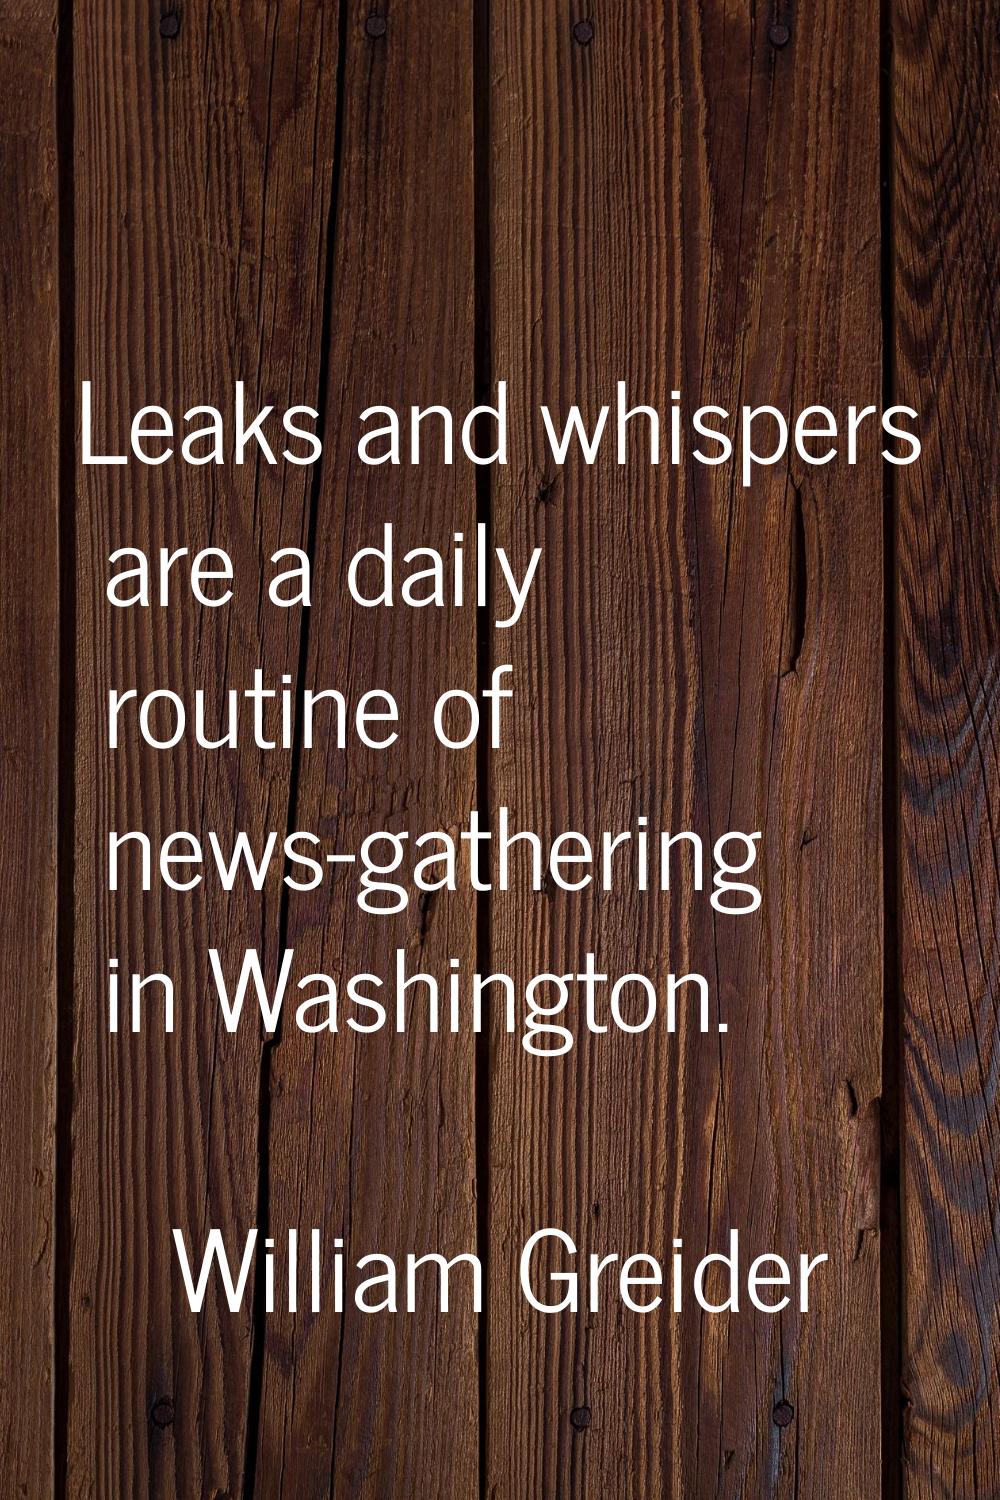 Leaks and whispers are a daily routine of news-gathering in Washington.